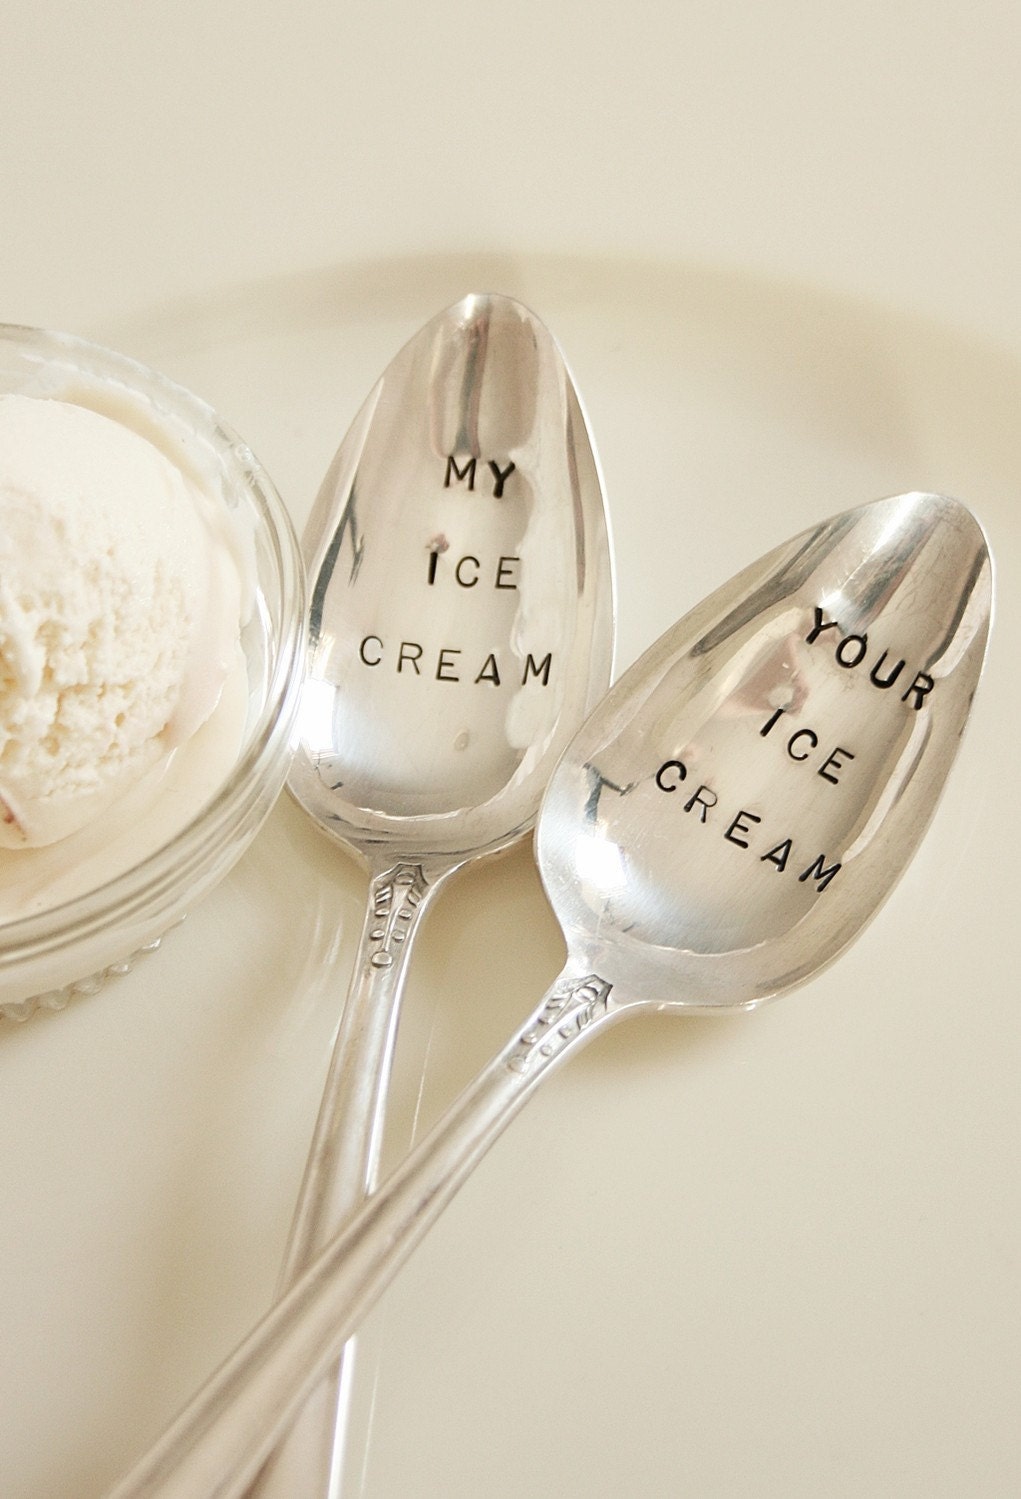 Vintage my ice cream your ice cream silver plated spoon set recycled flatware beachhouseliving on etsy